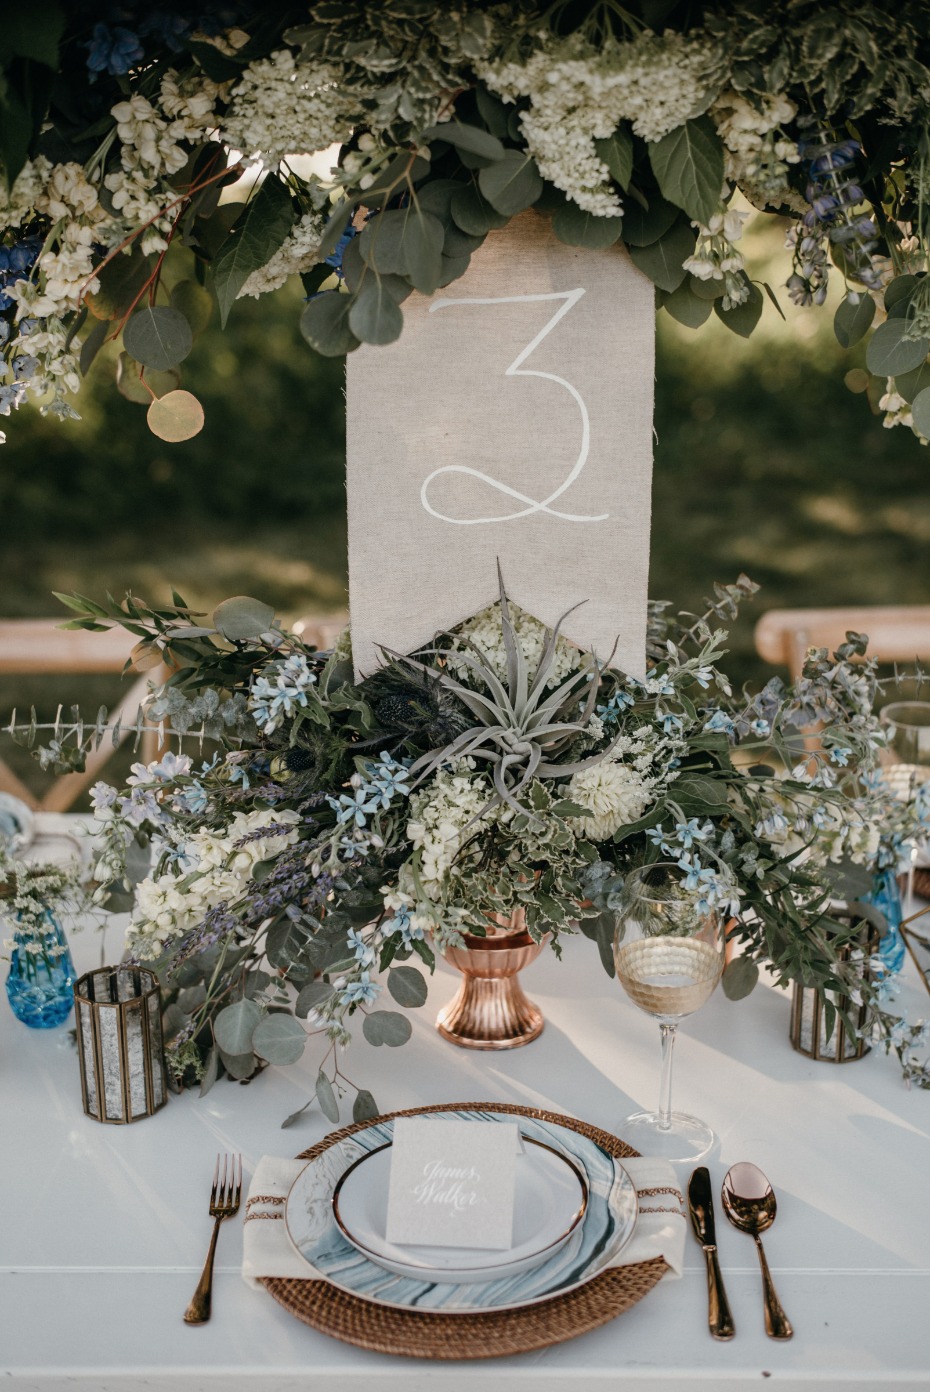 Beautiful table decor in blue, gold and white